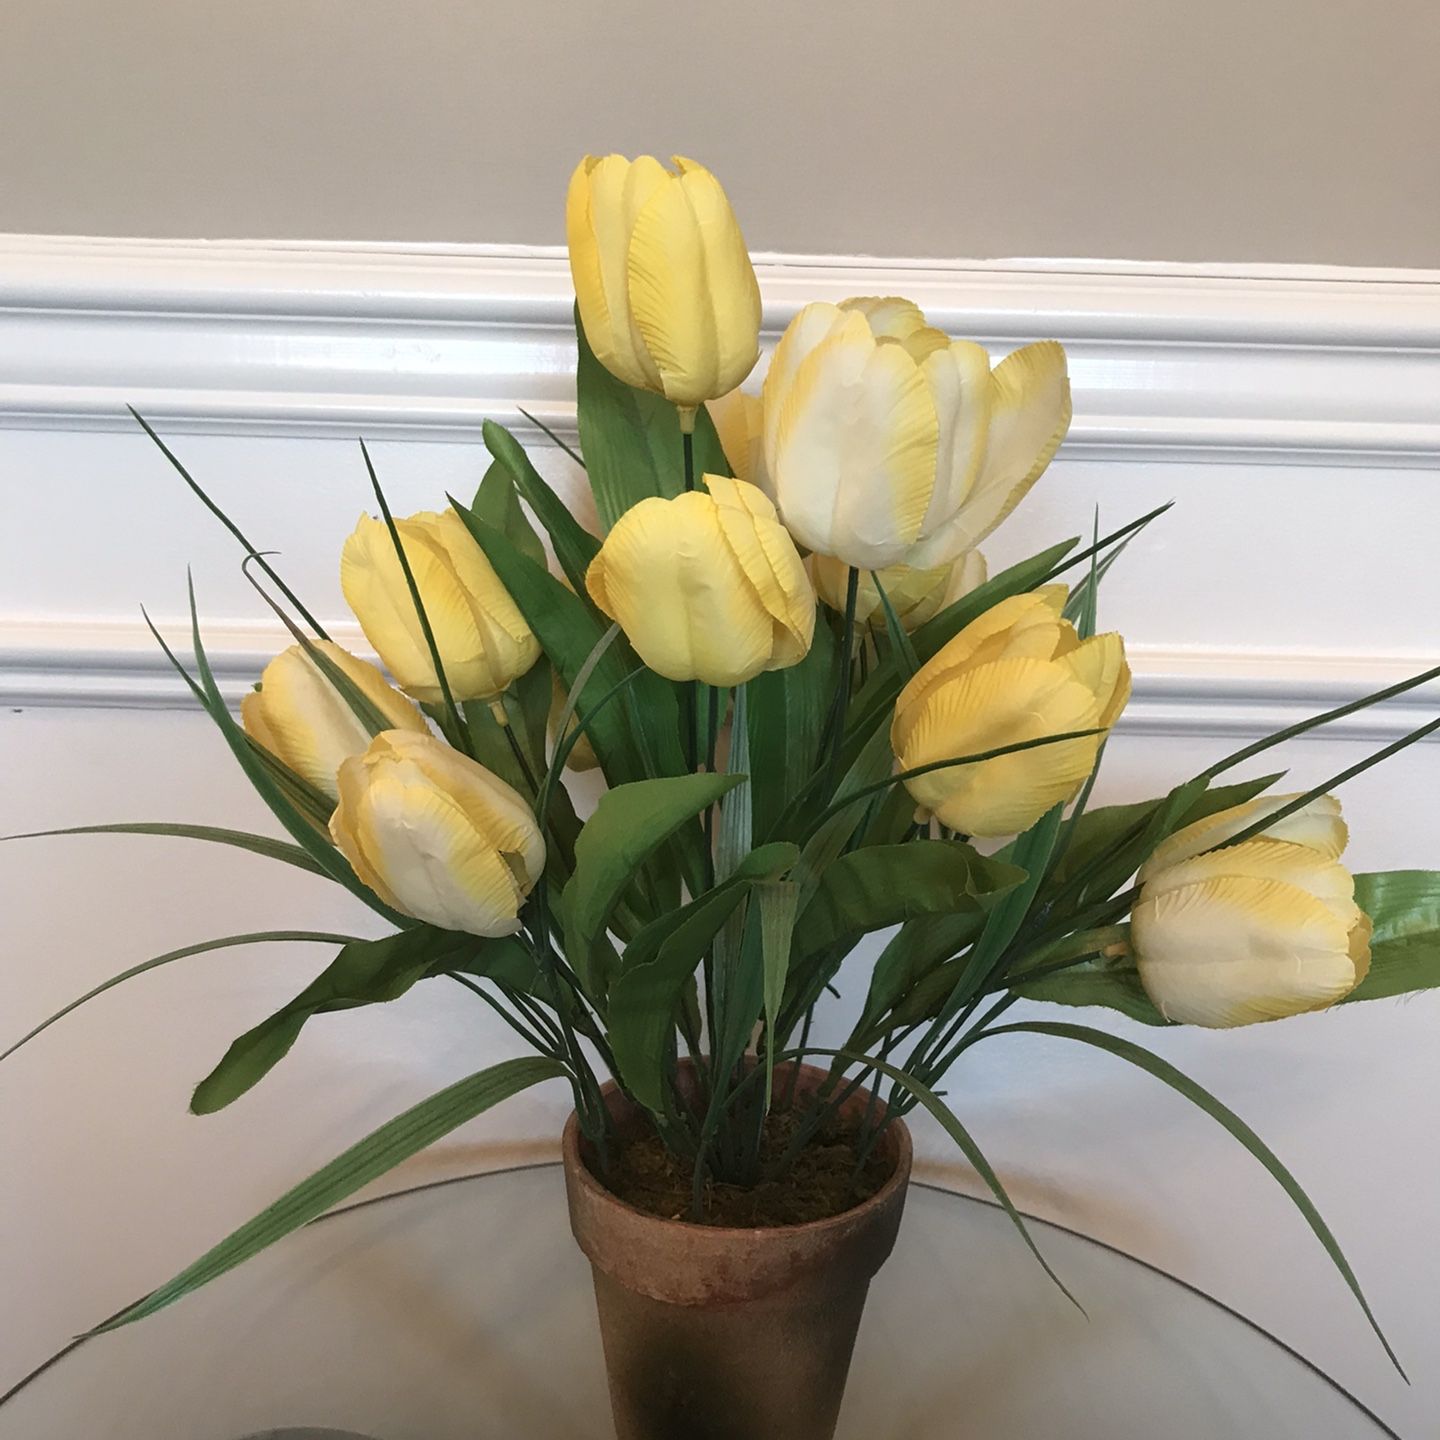 Yellow Tulips in Clay Pot 17”T